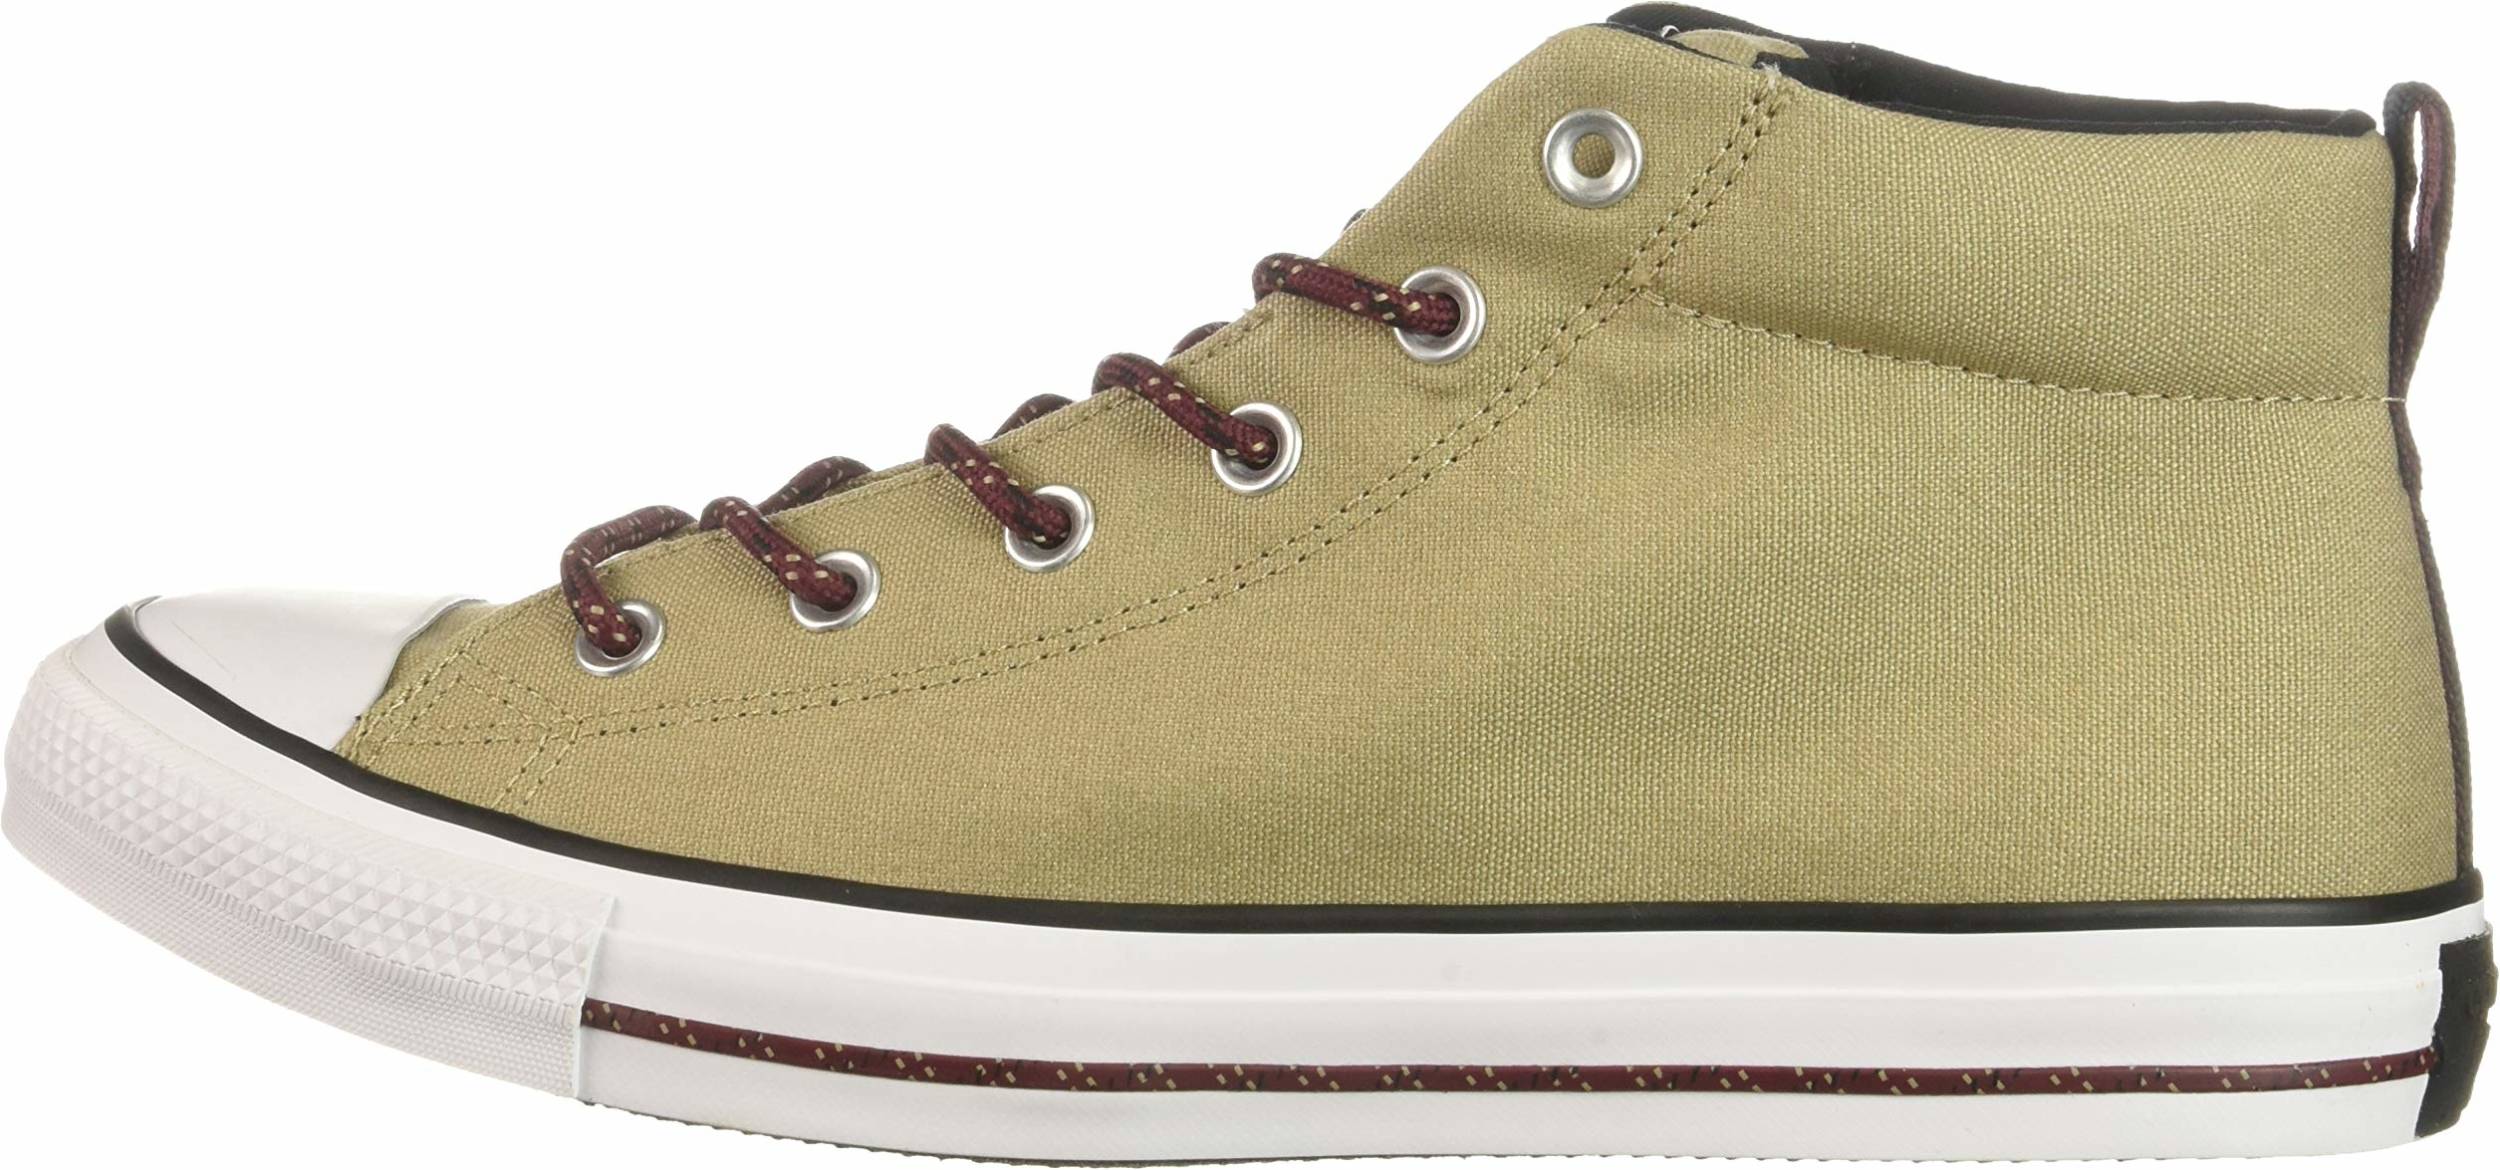 11 Reasons to/NOT to Buy Converse Chuck Taylor All Star Street Mid ...